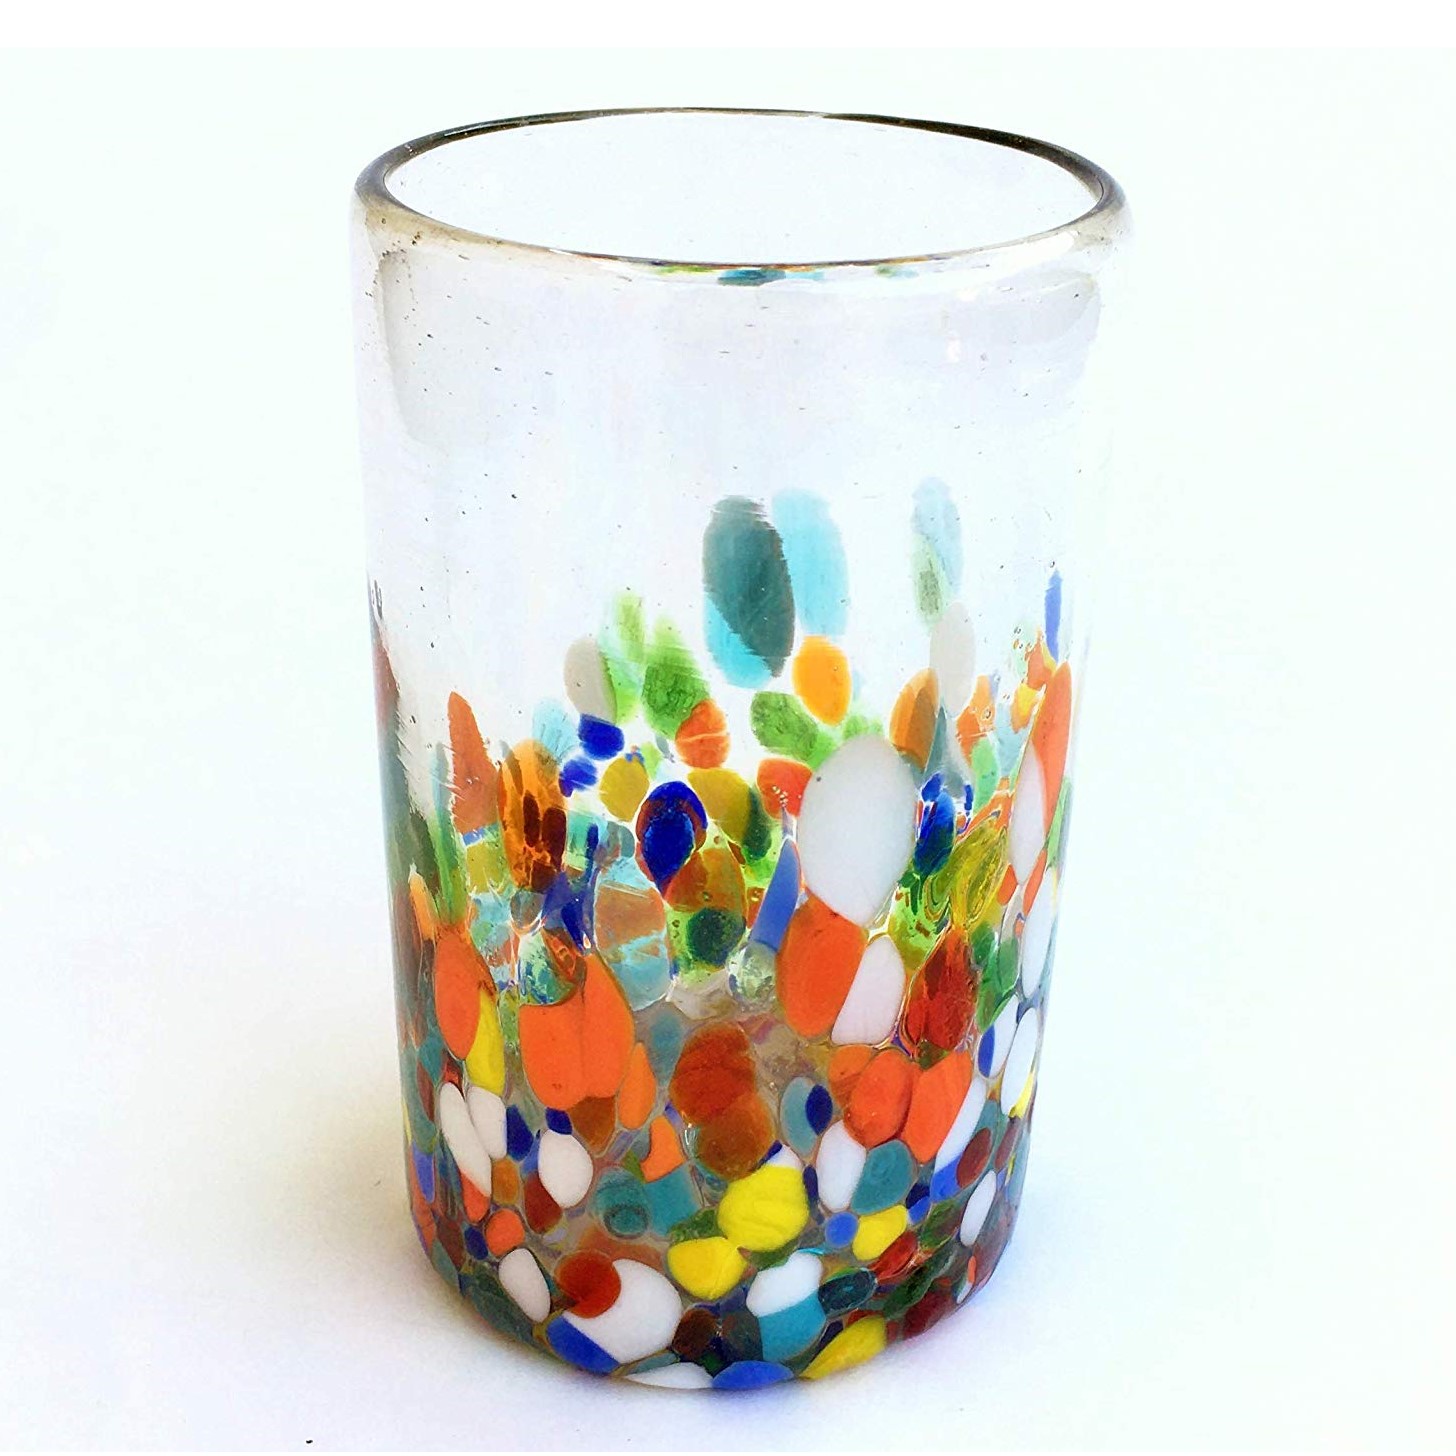 New Items / Clear & Confetti 14 oz Drinking Glasses (set of 6) / Our Clear & Confetti drinking glasses combine the best of two worlds: clear, thick, sturdy handcrafted glass on top, meets the colorful, festive, confetti bottom! These glasses will sure be a standout in any table setting or as a fabulous gift for your loved ones. Crafted one by one by skilled artisans in Tonala, Mexico, each glass is different from the next making them unique works of art. You'll be amazed at how they make having a simple glass of water a happier experience. Each glass holds approximately 14 oz of liquid and stands a bit over 5